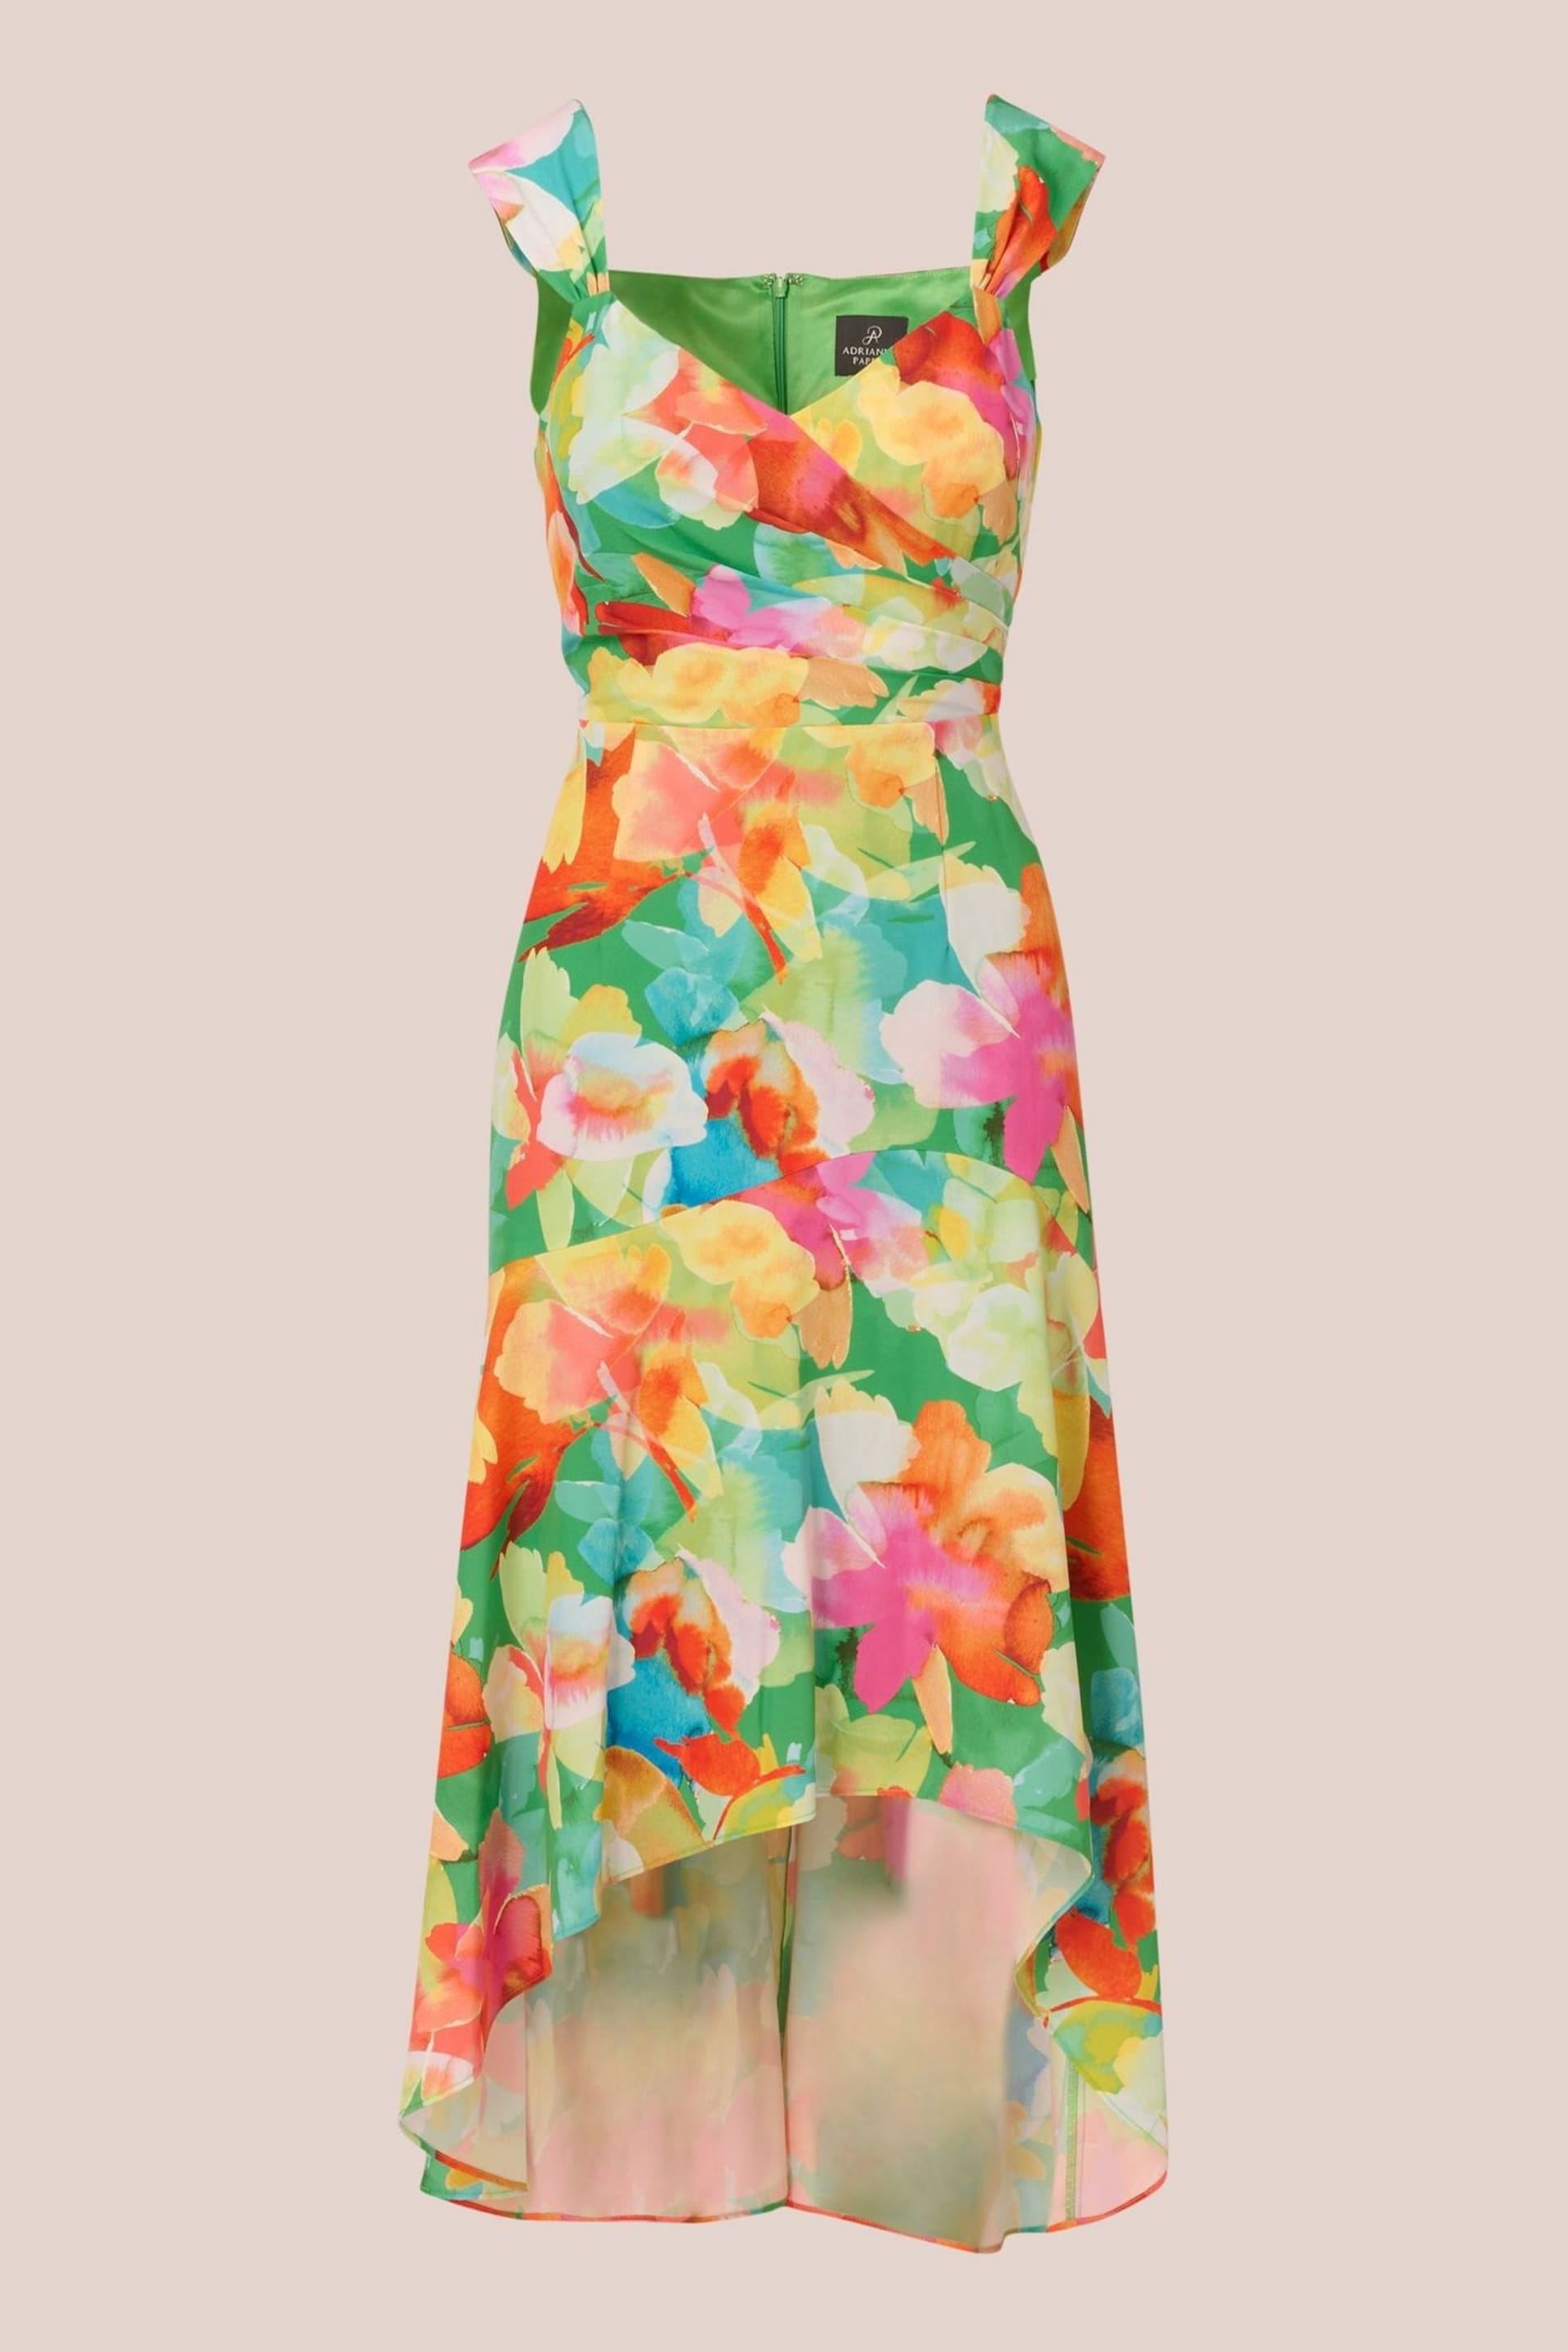 Adrianna Papell Multi Printed Hi-Low Dress - Image 6 of 7